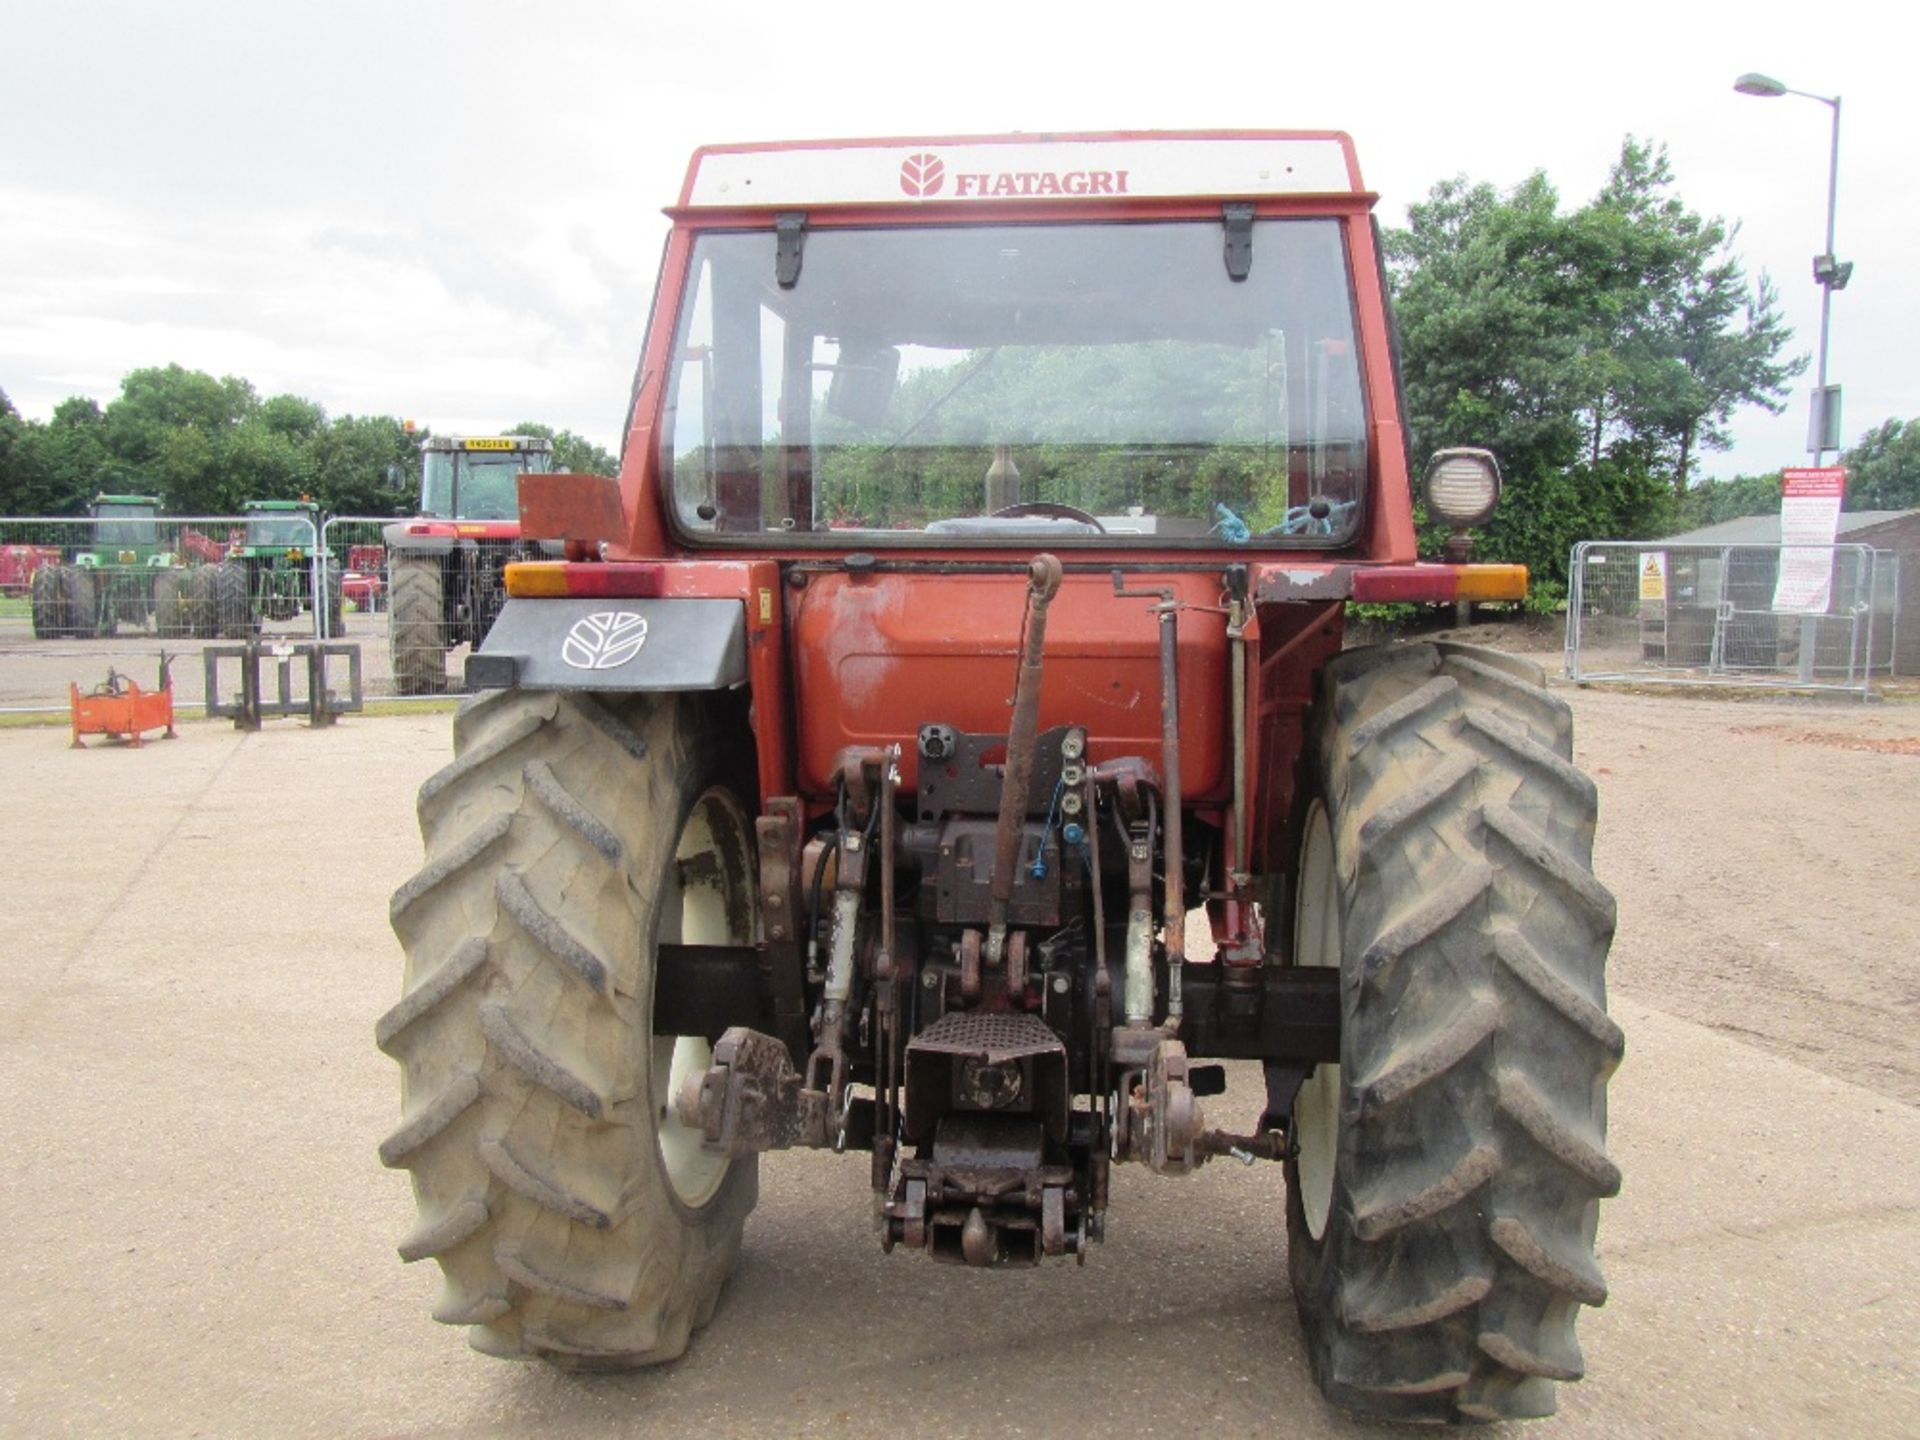 Fiat Tractor 90-90 DT 4wd Tractor. V5 will be supplied. Reg. No. F854 PHP Ser No 817899 - Image 6 of 16